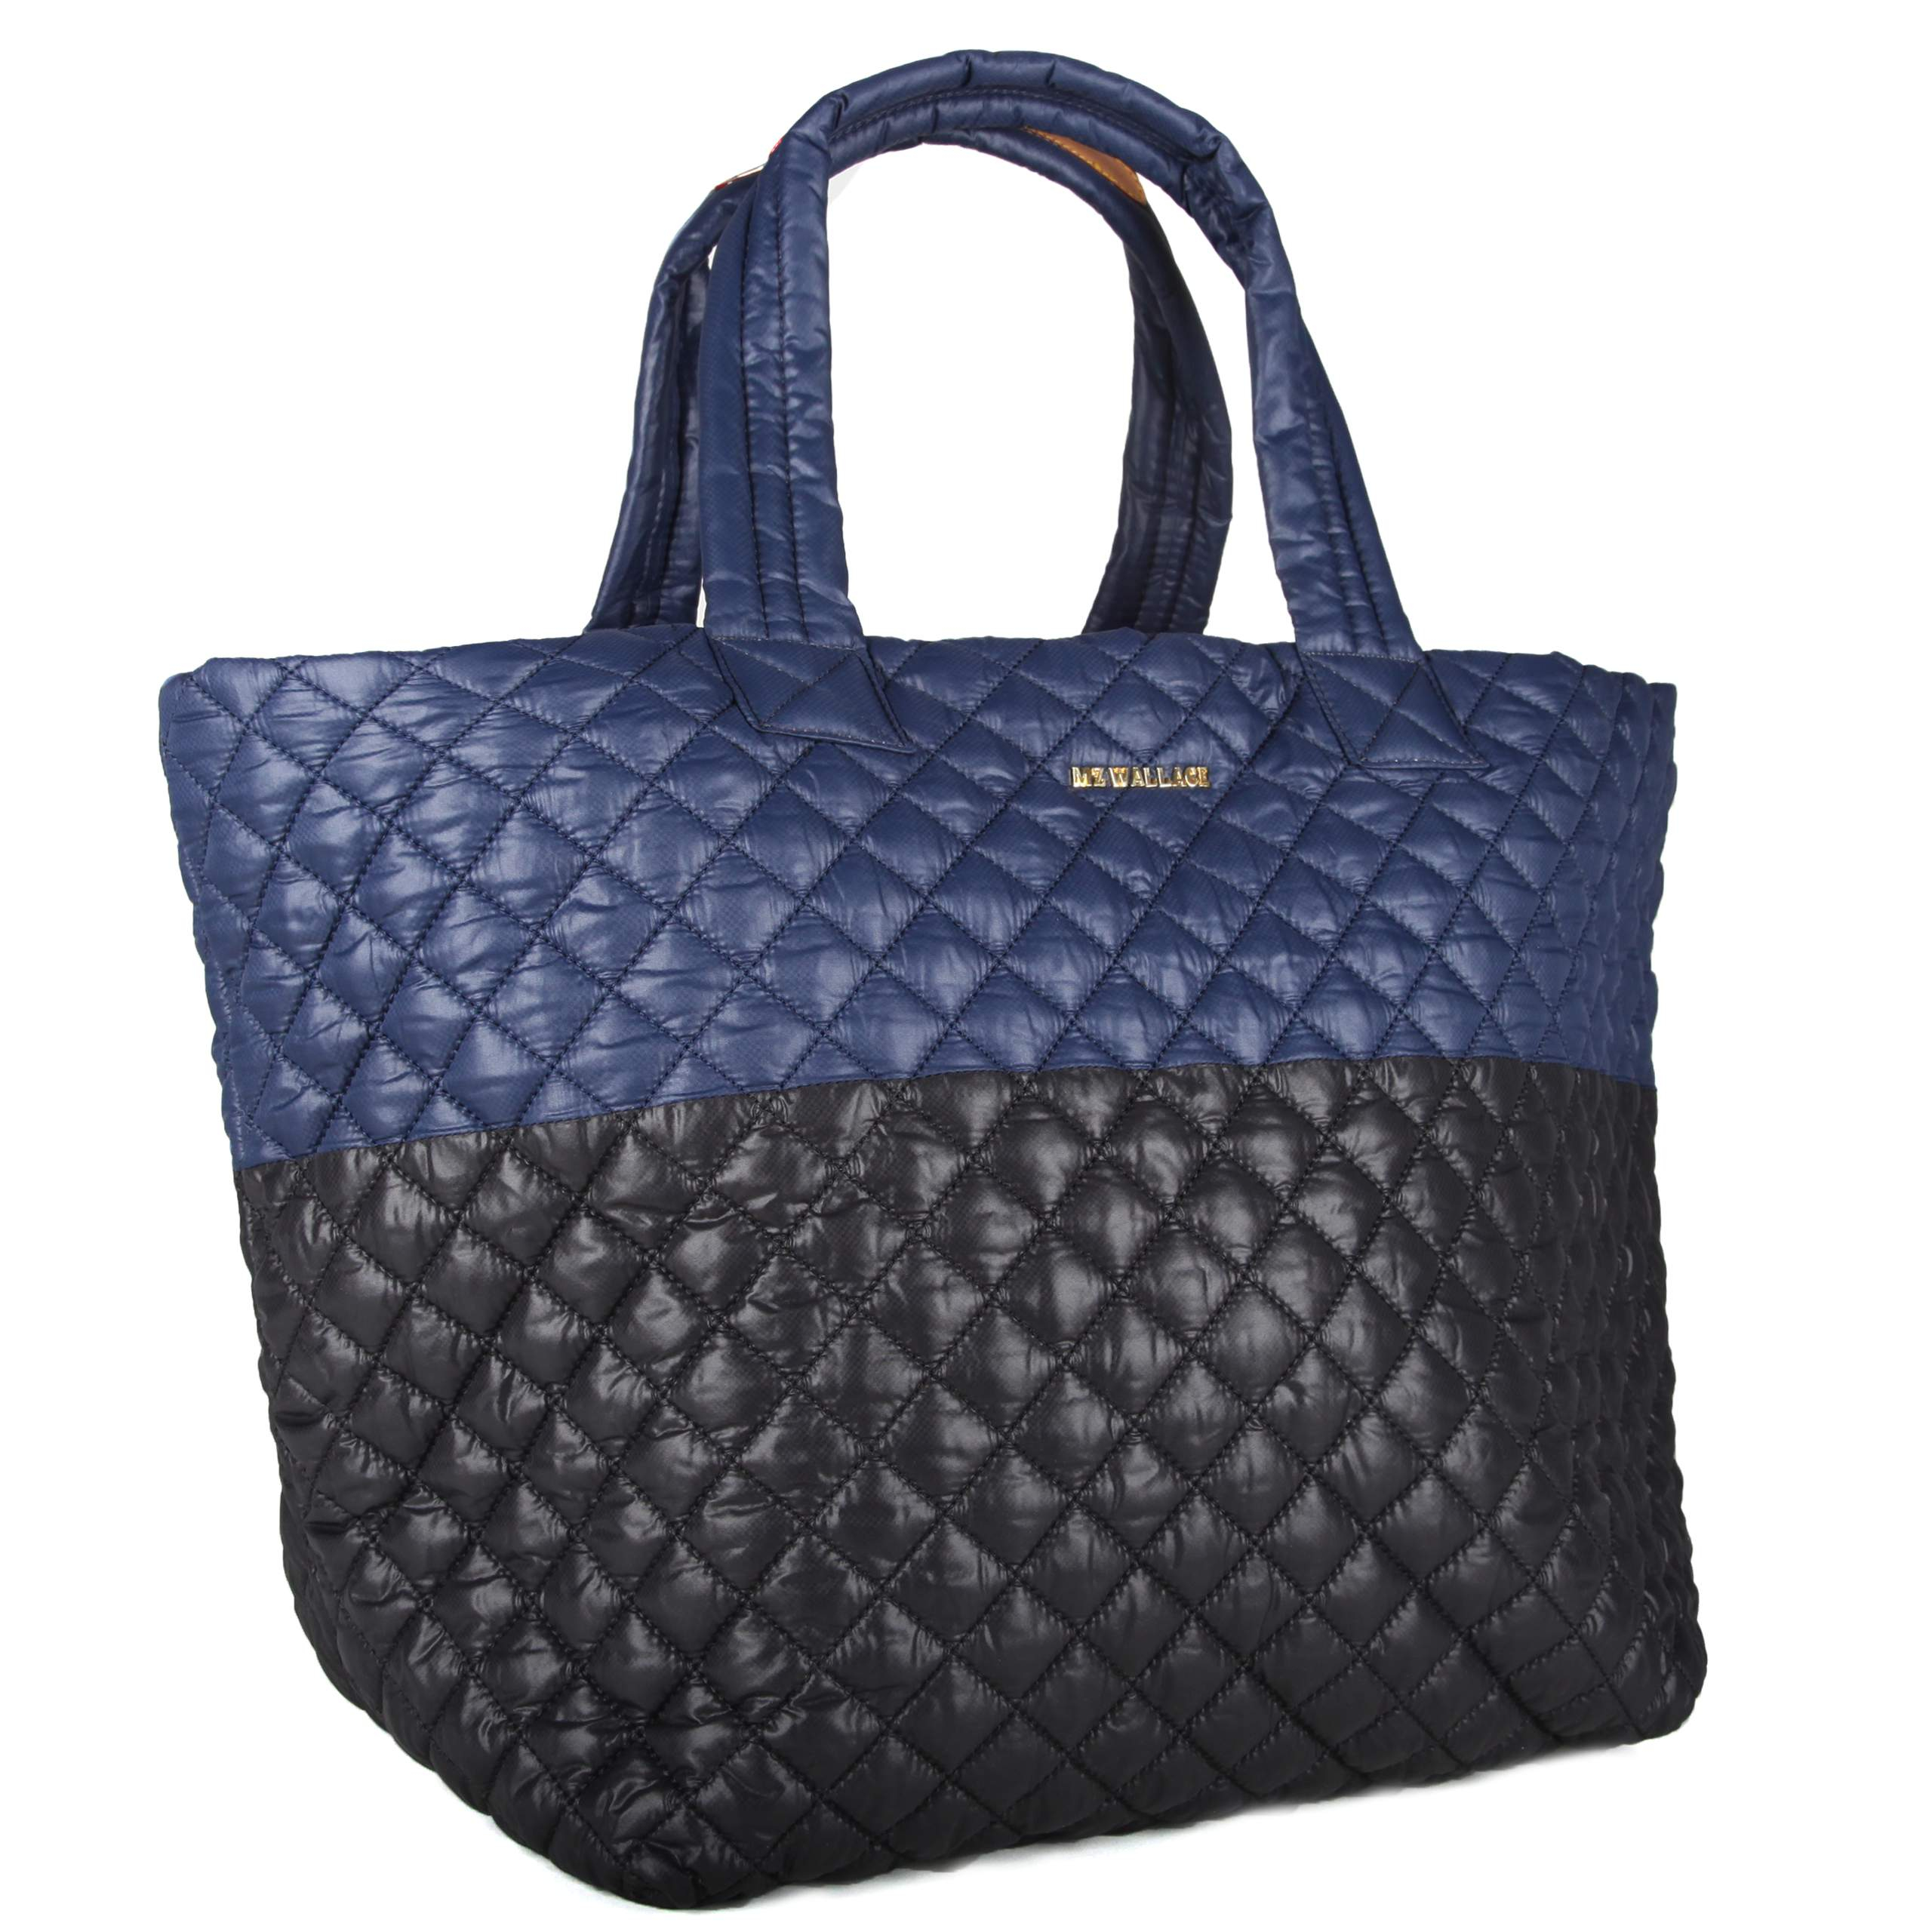 Mz wallace Large Metro Tote in Black | Lyst